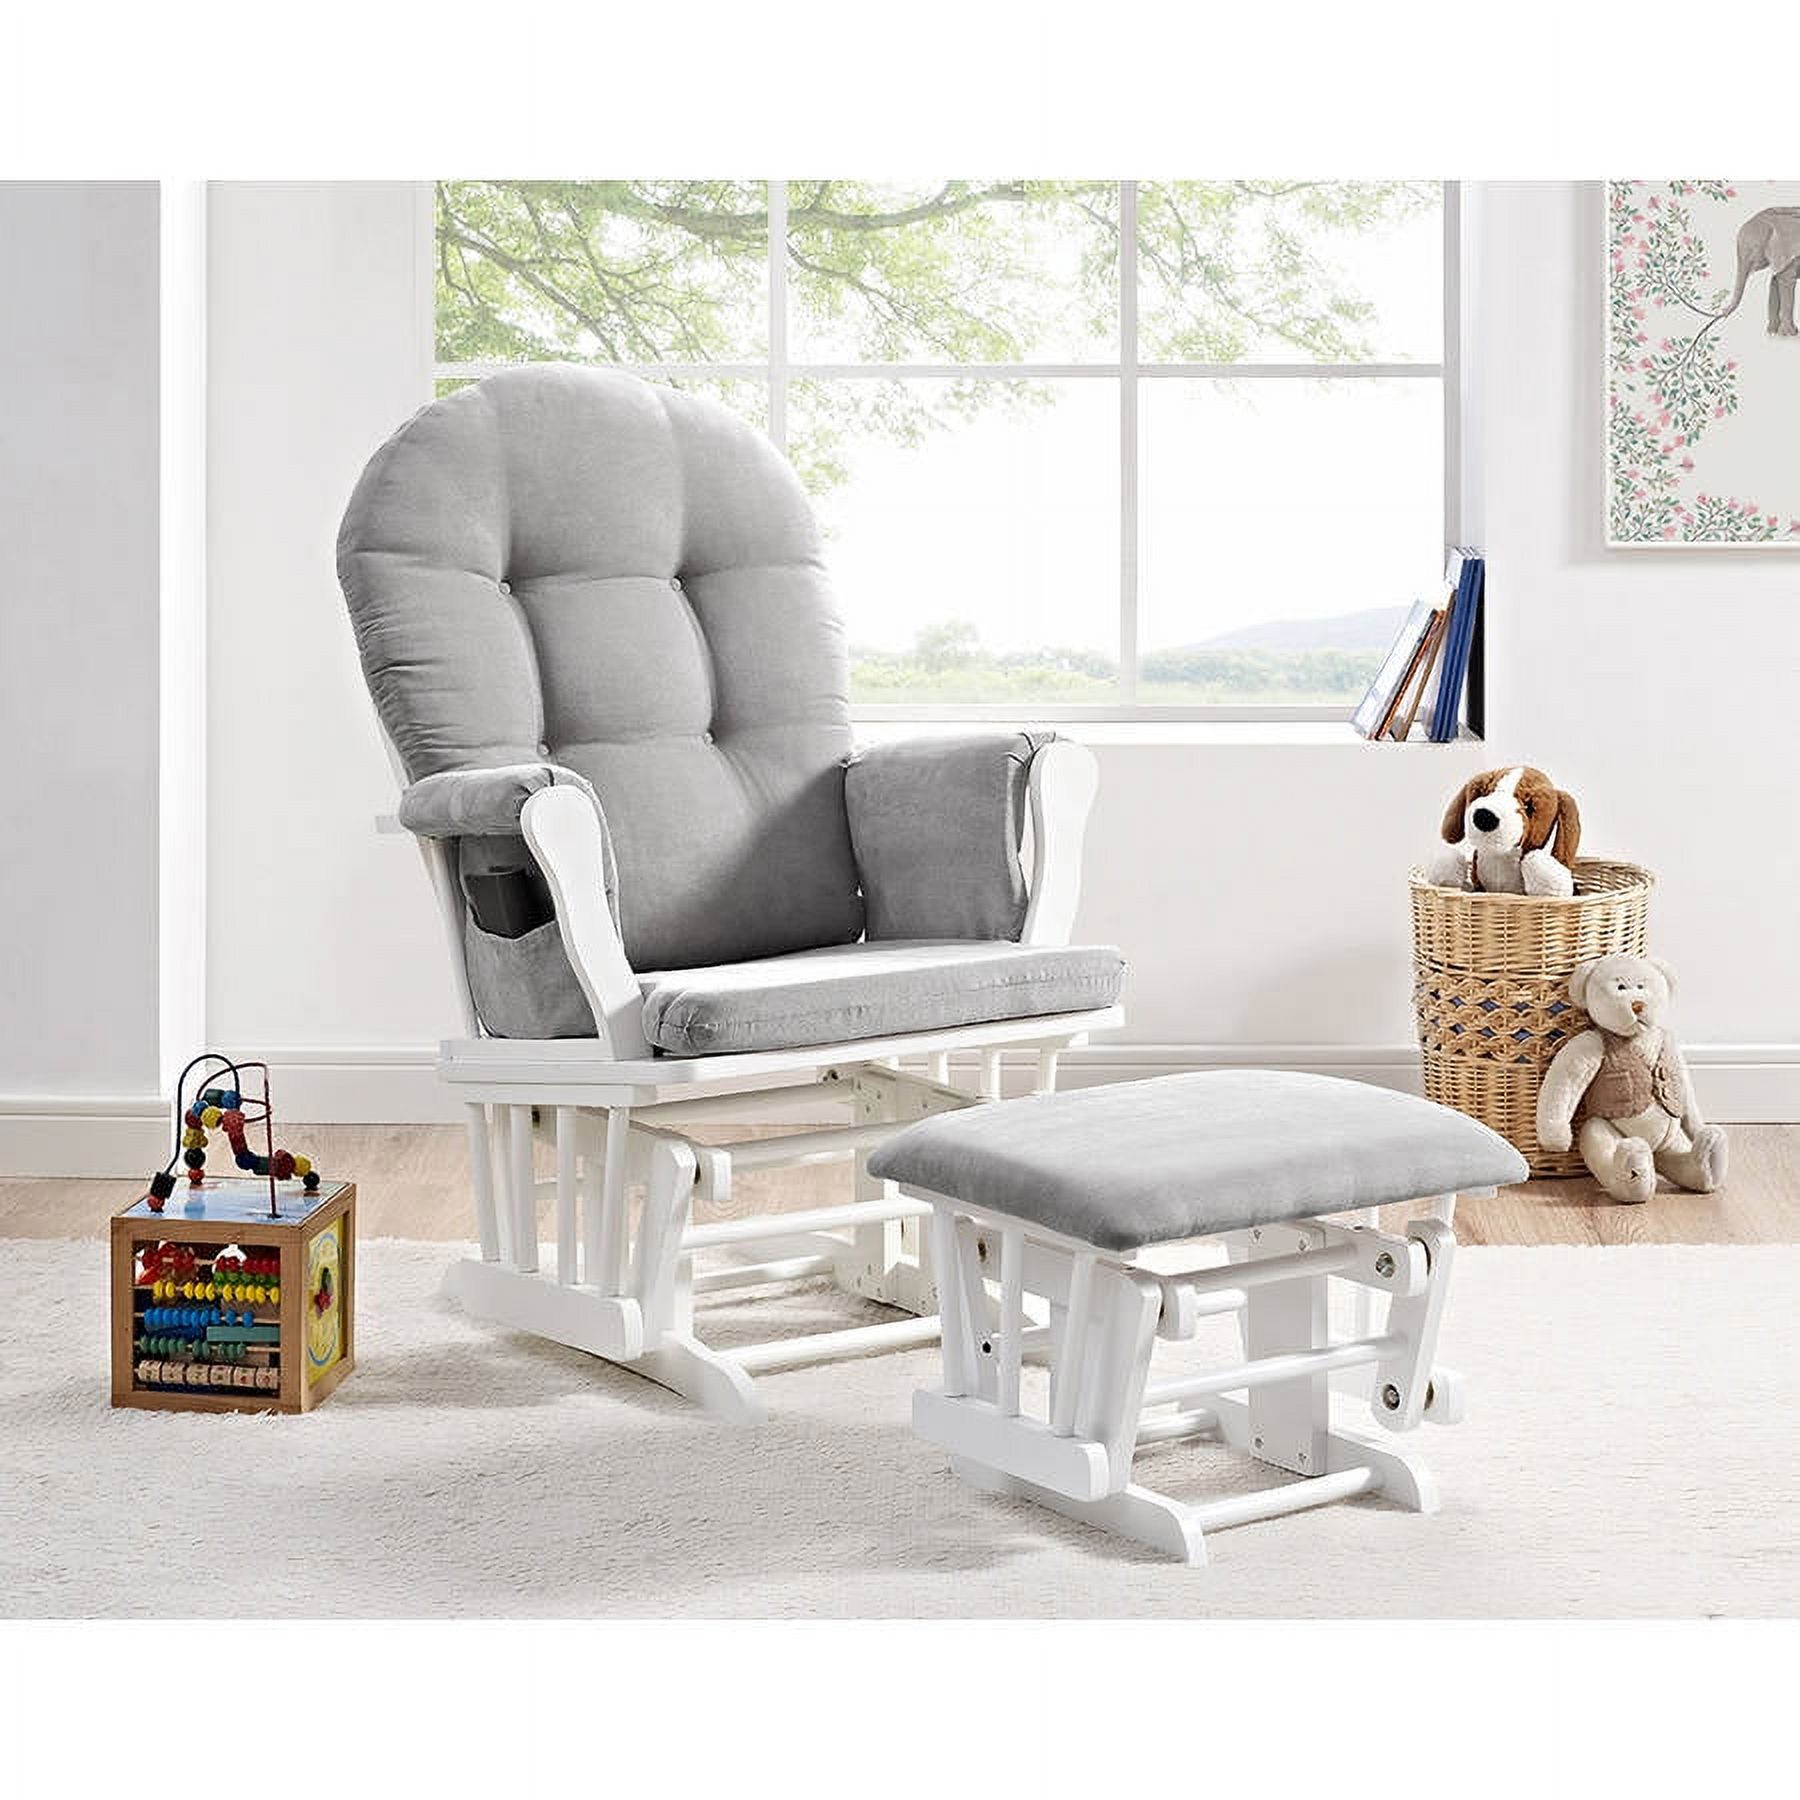 Angel Line Windsor Glider and Ottoman, White Finish with Gray Cushions - image 1 of 6